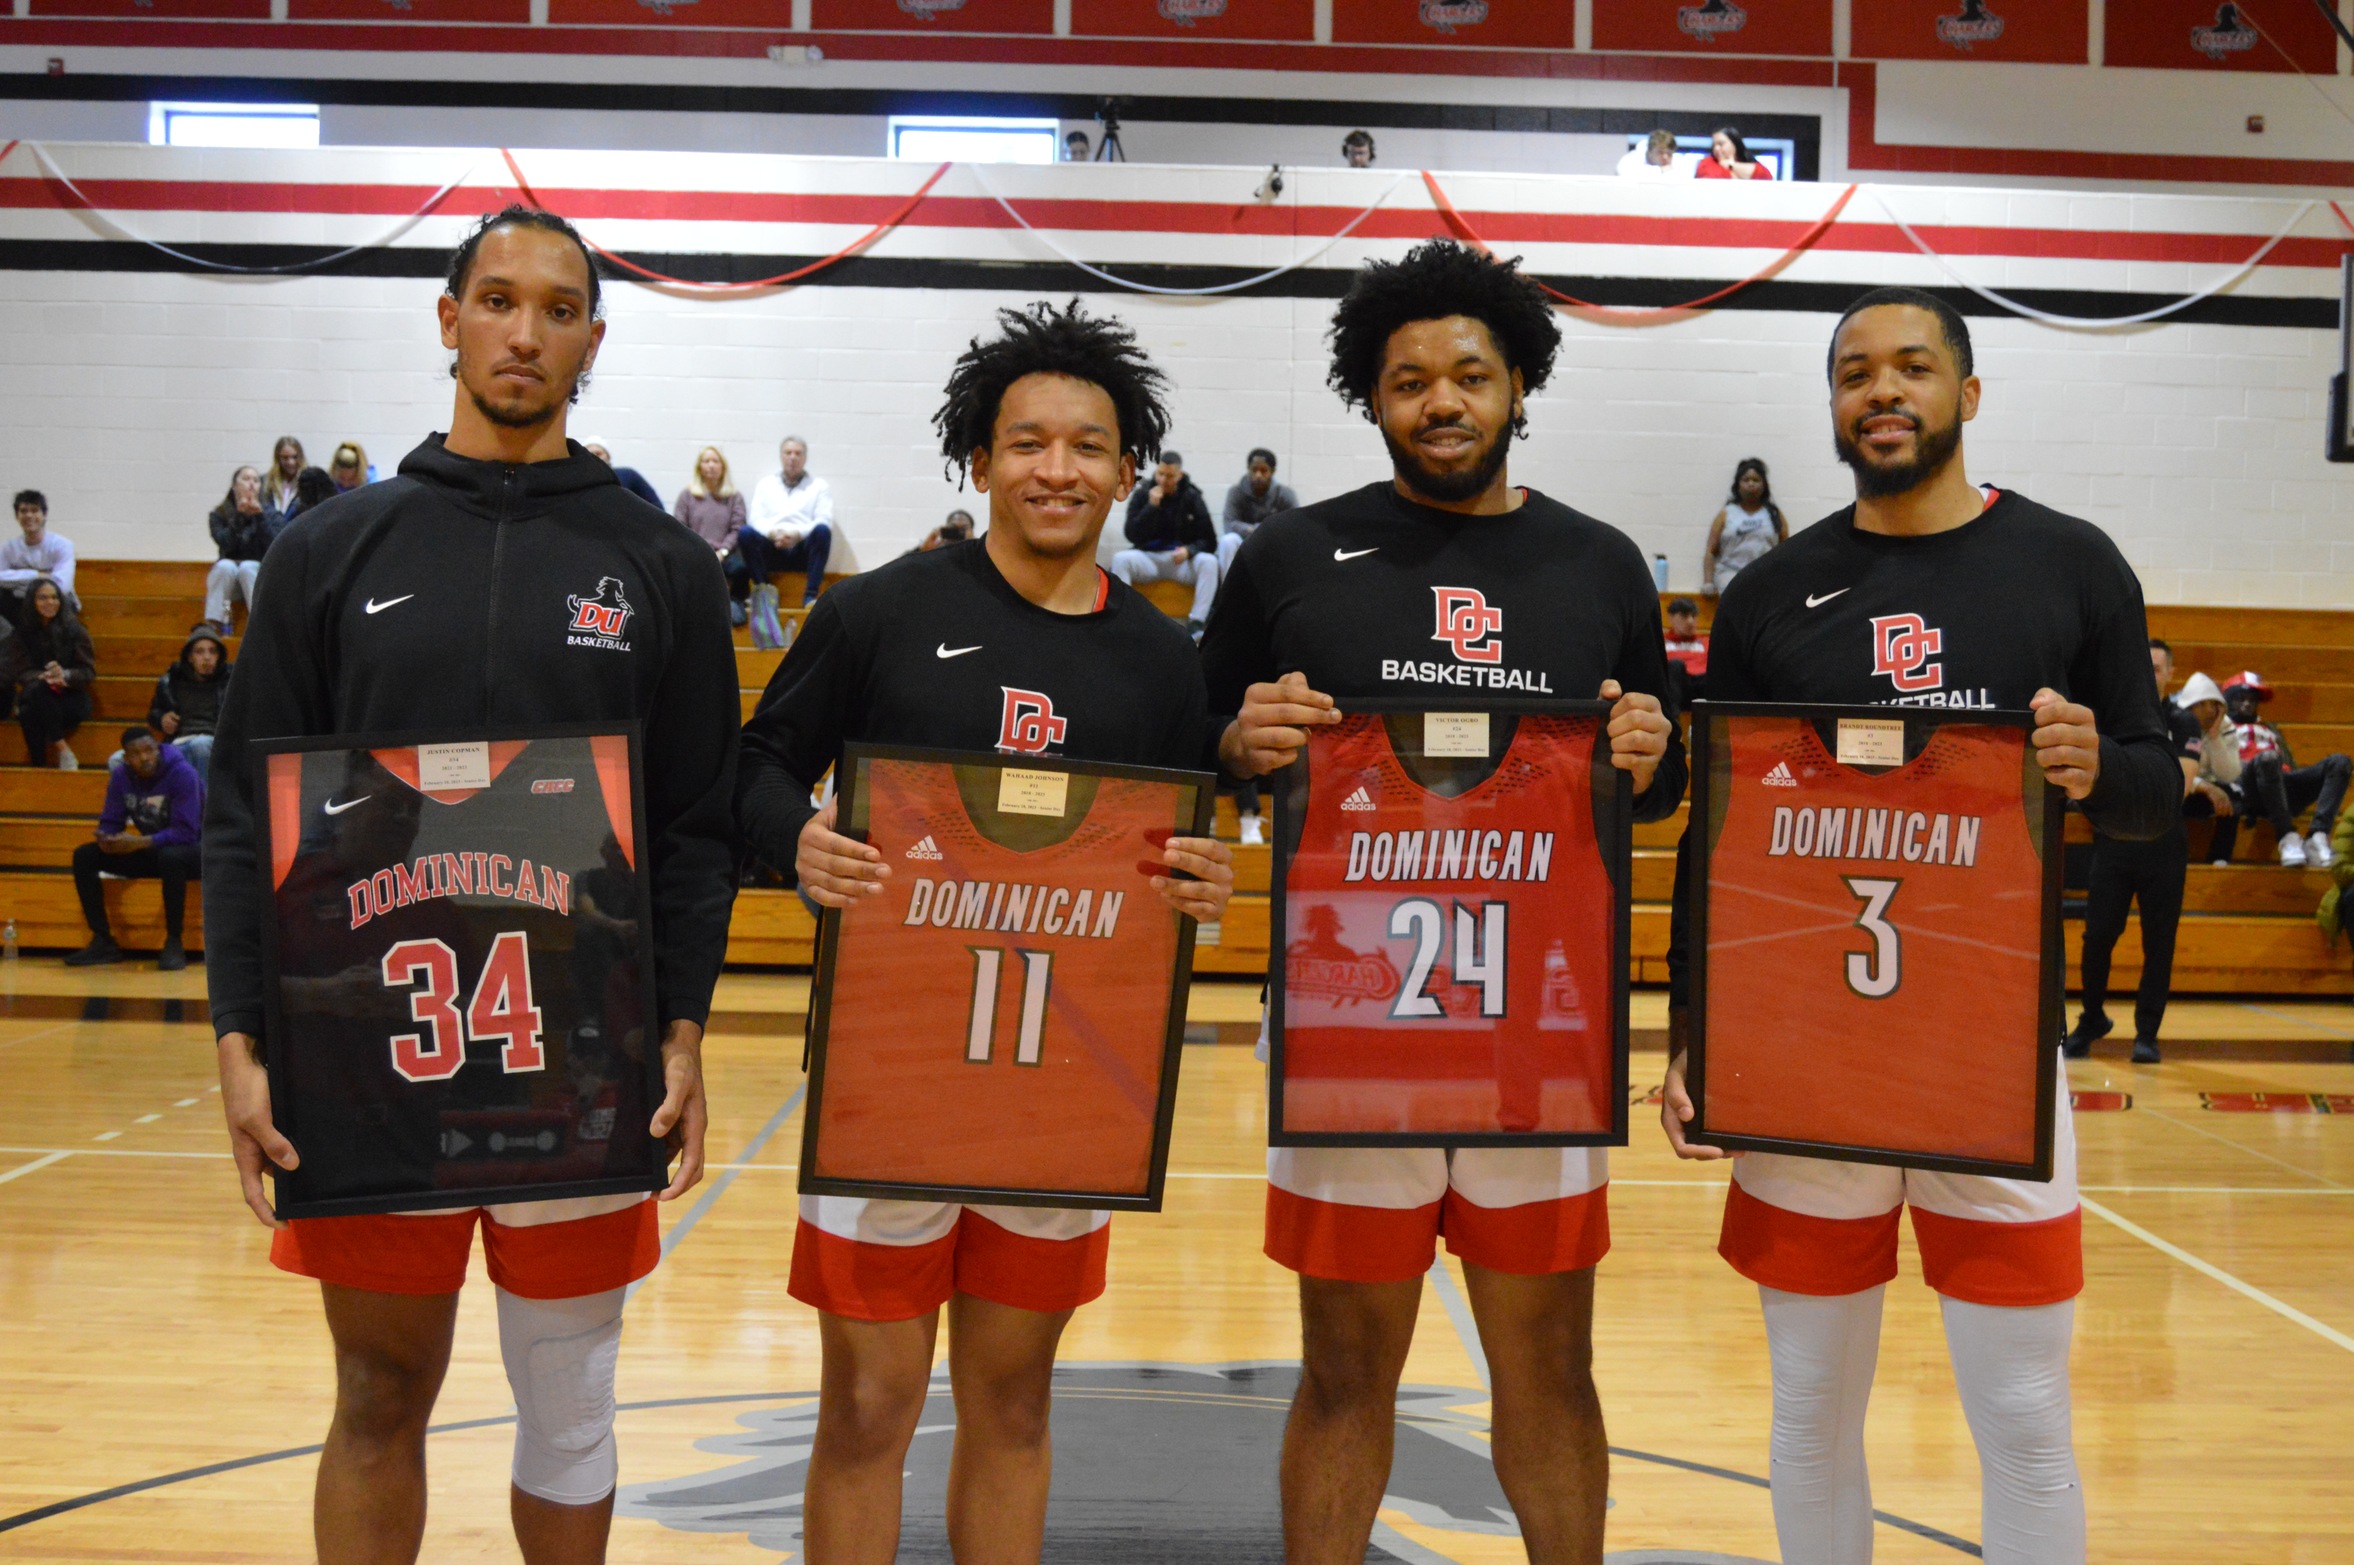 MEN'S BASKETBALL SUFFERS LOSS TO BLOOMFIELD COLLEGE ON SENIOR DAY